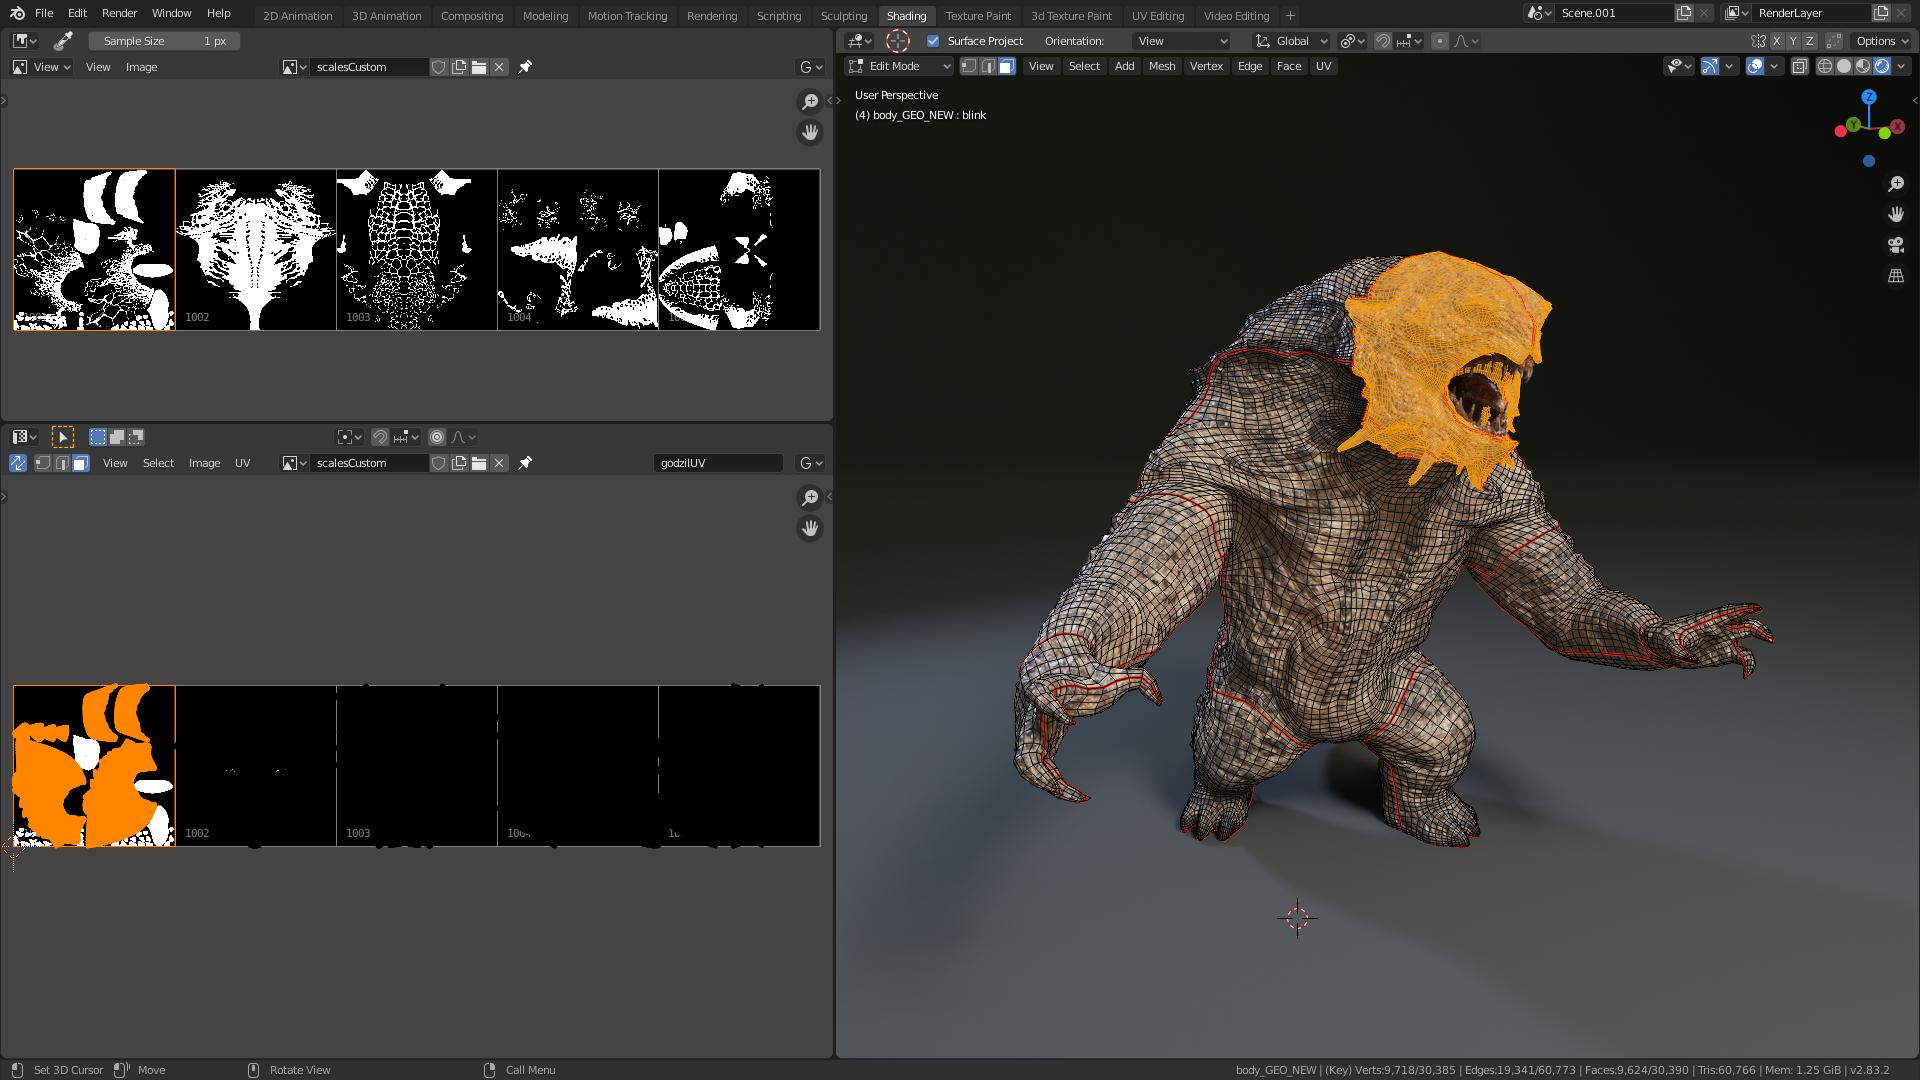 Blender 2.82 Released with AI Denoiser for Nvidia RTX GPUs, More